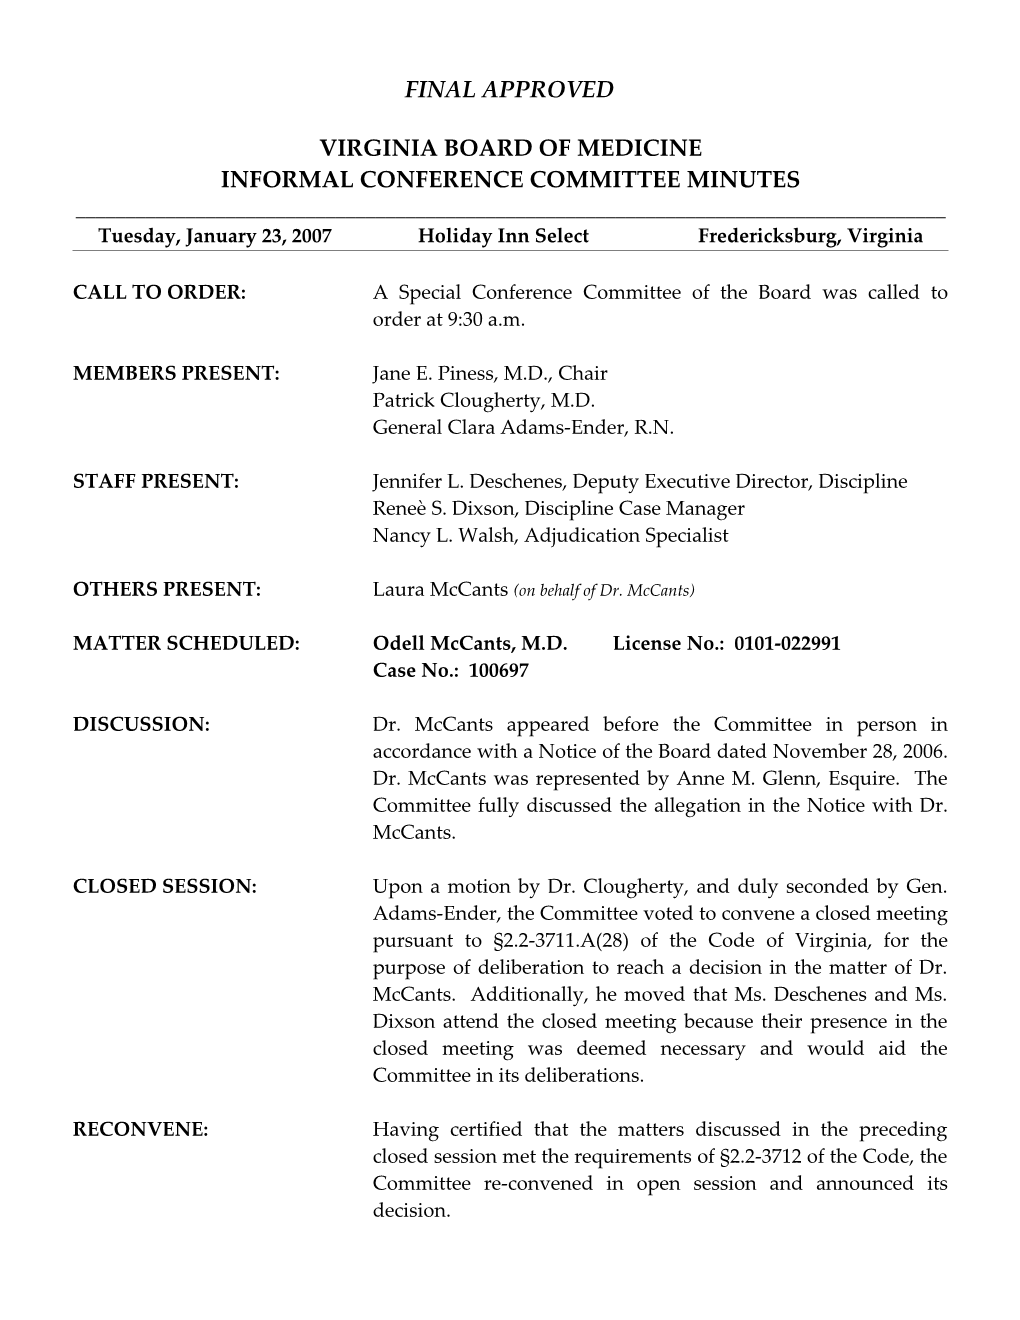 Informal Conference Committee Minutes